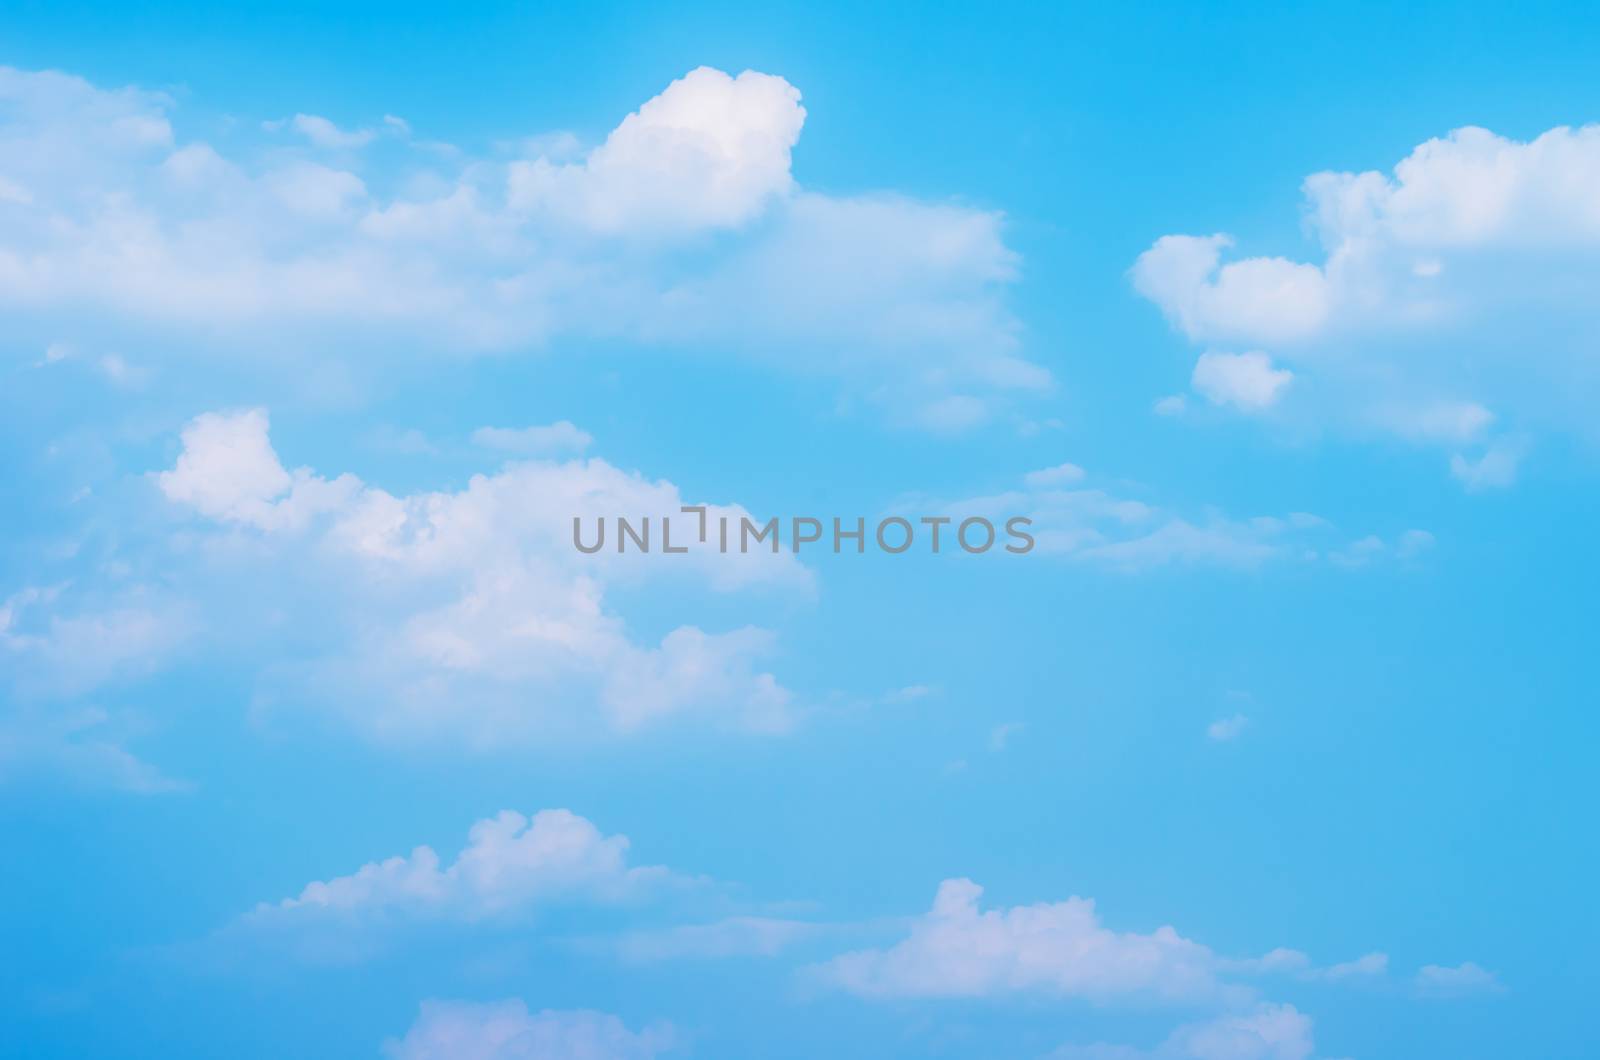 Clouds in the sky by photobyphotoboy